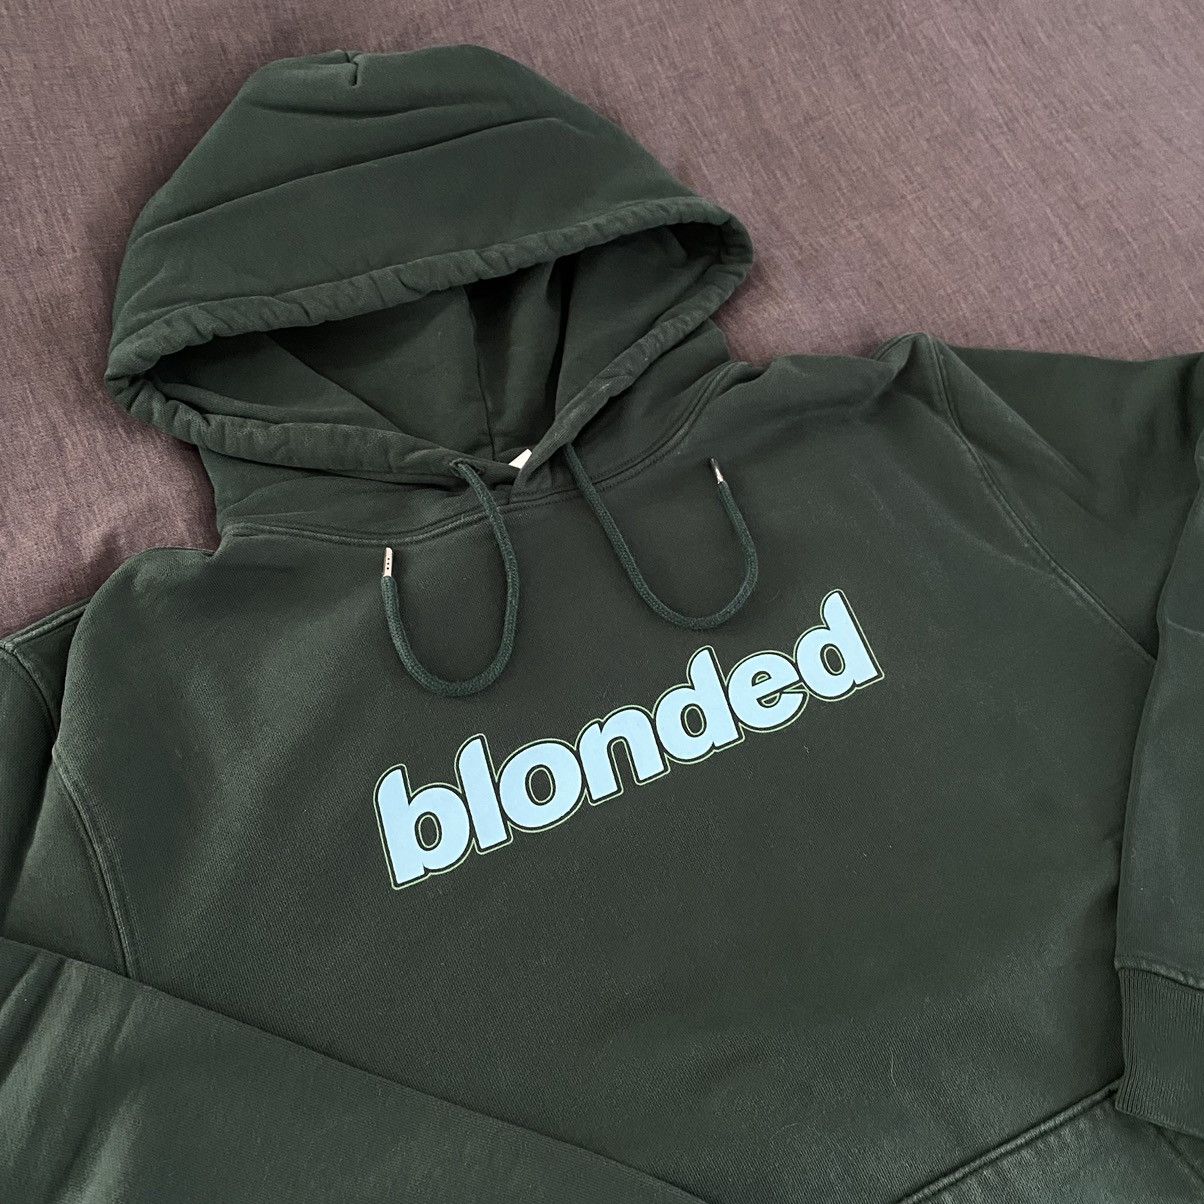 Frank Ocean Blonded Hoodie (Green) Size US L / EU 52-54 / 3 - 2 Preview